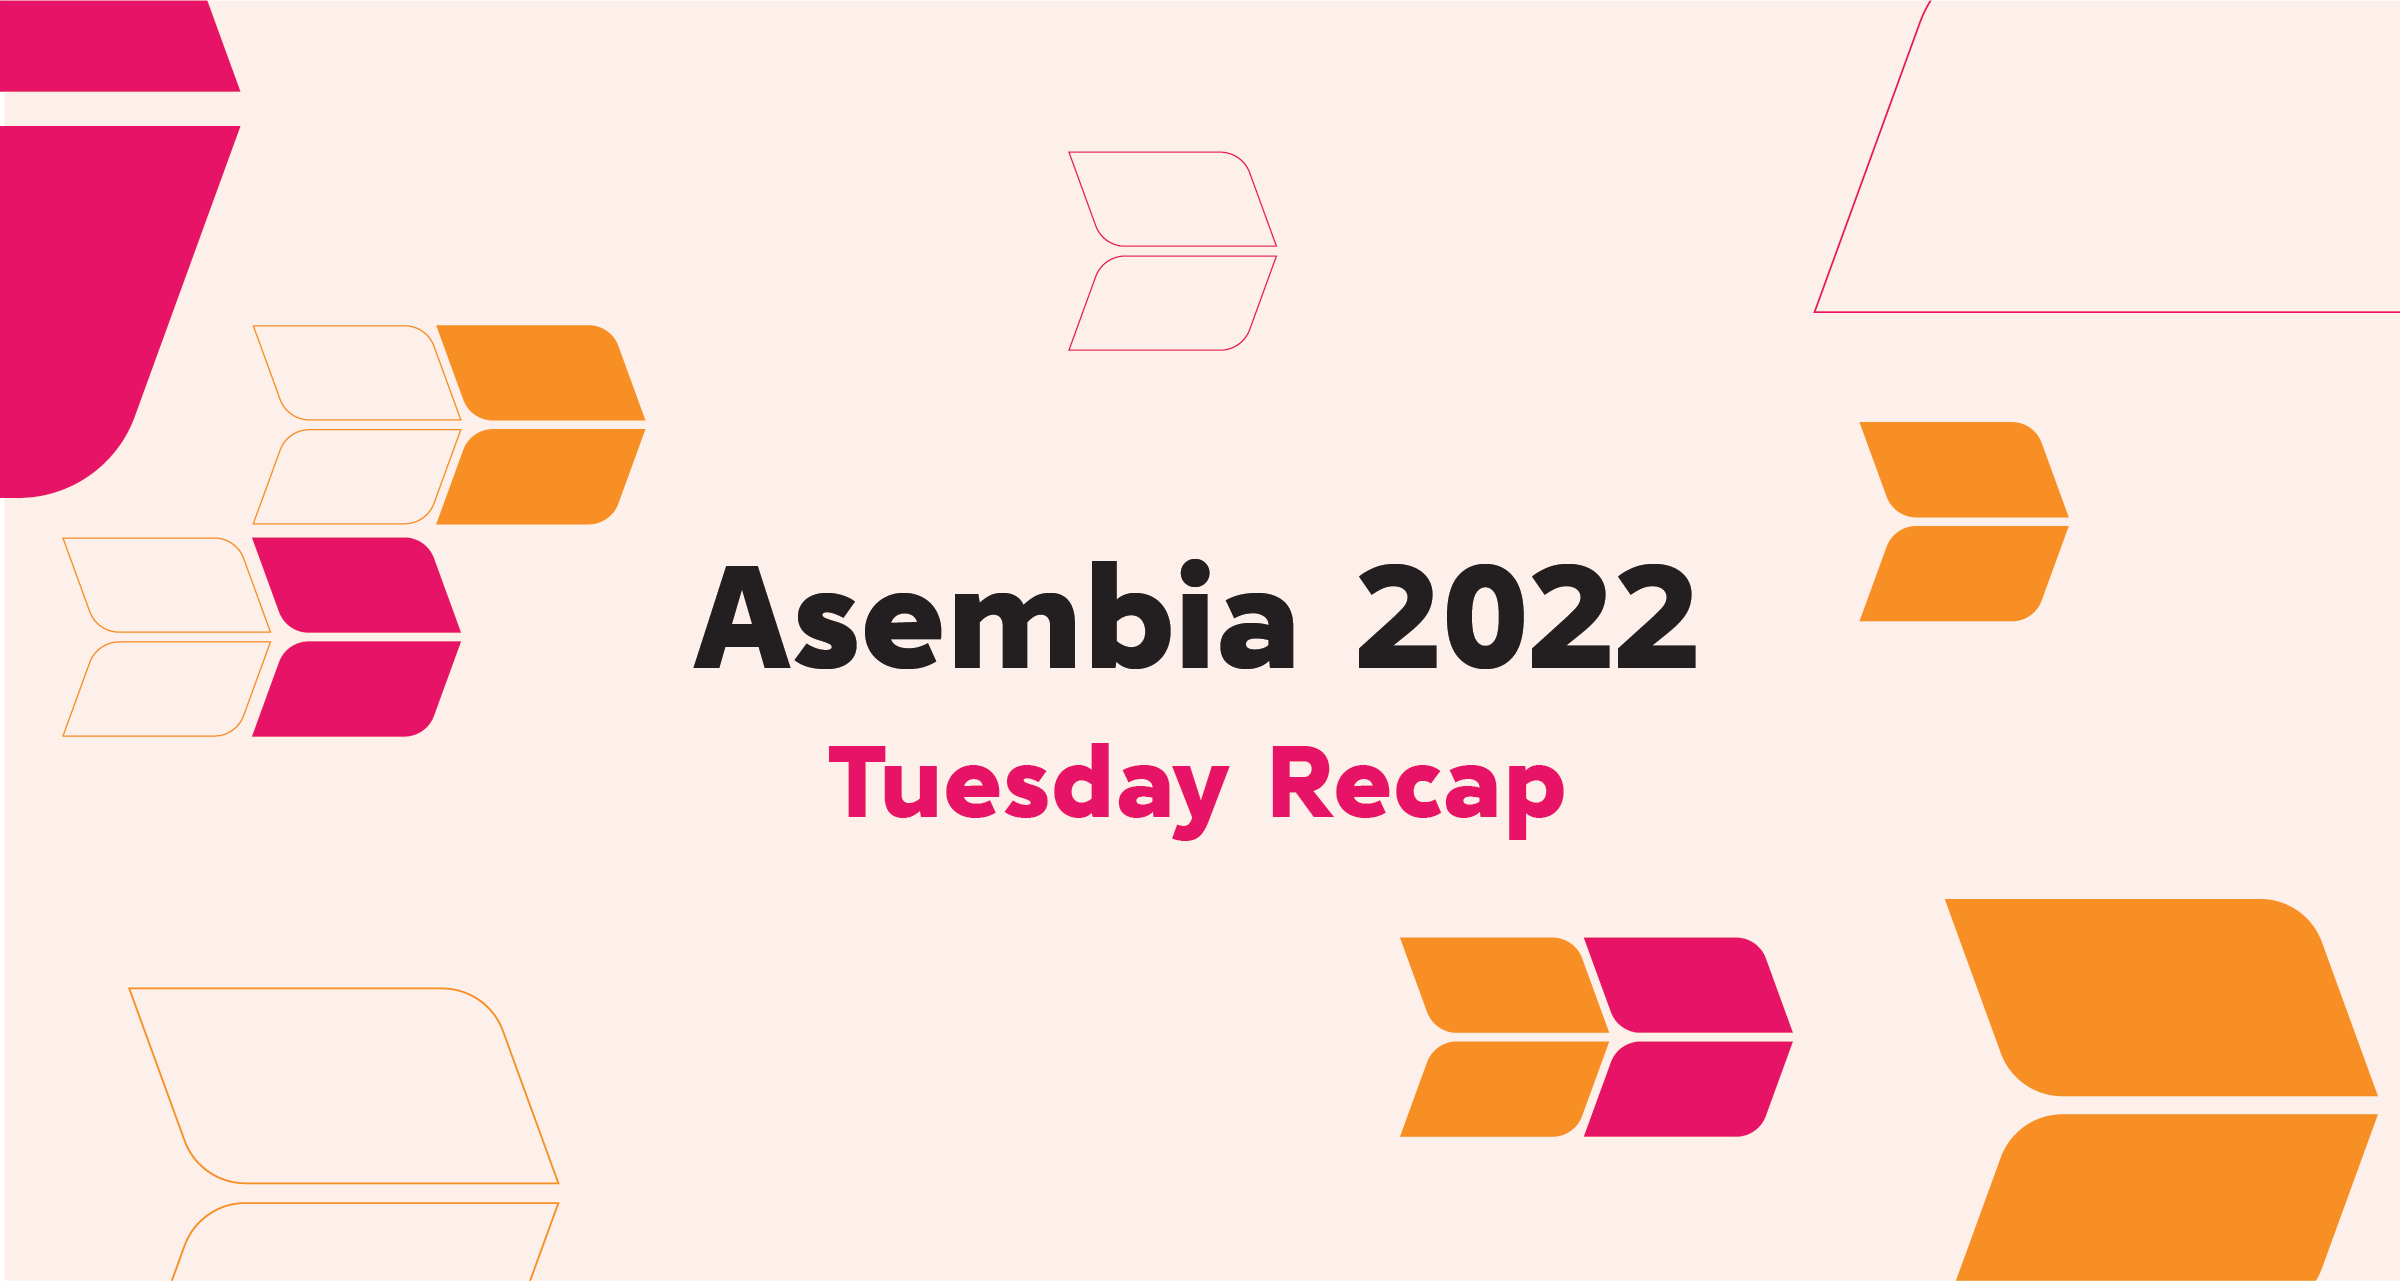 Asembia 2022 Tuesday recap with magenta and orange arrows